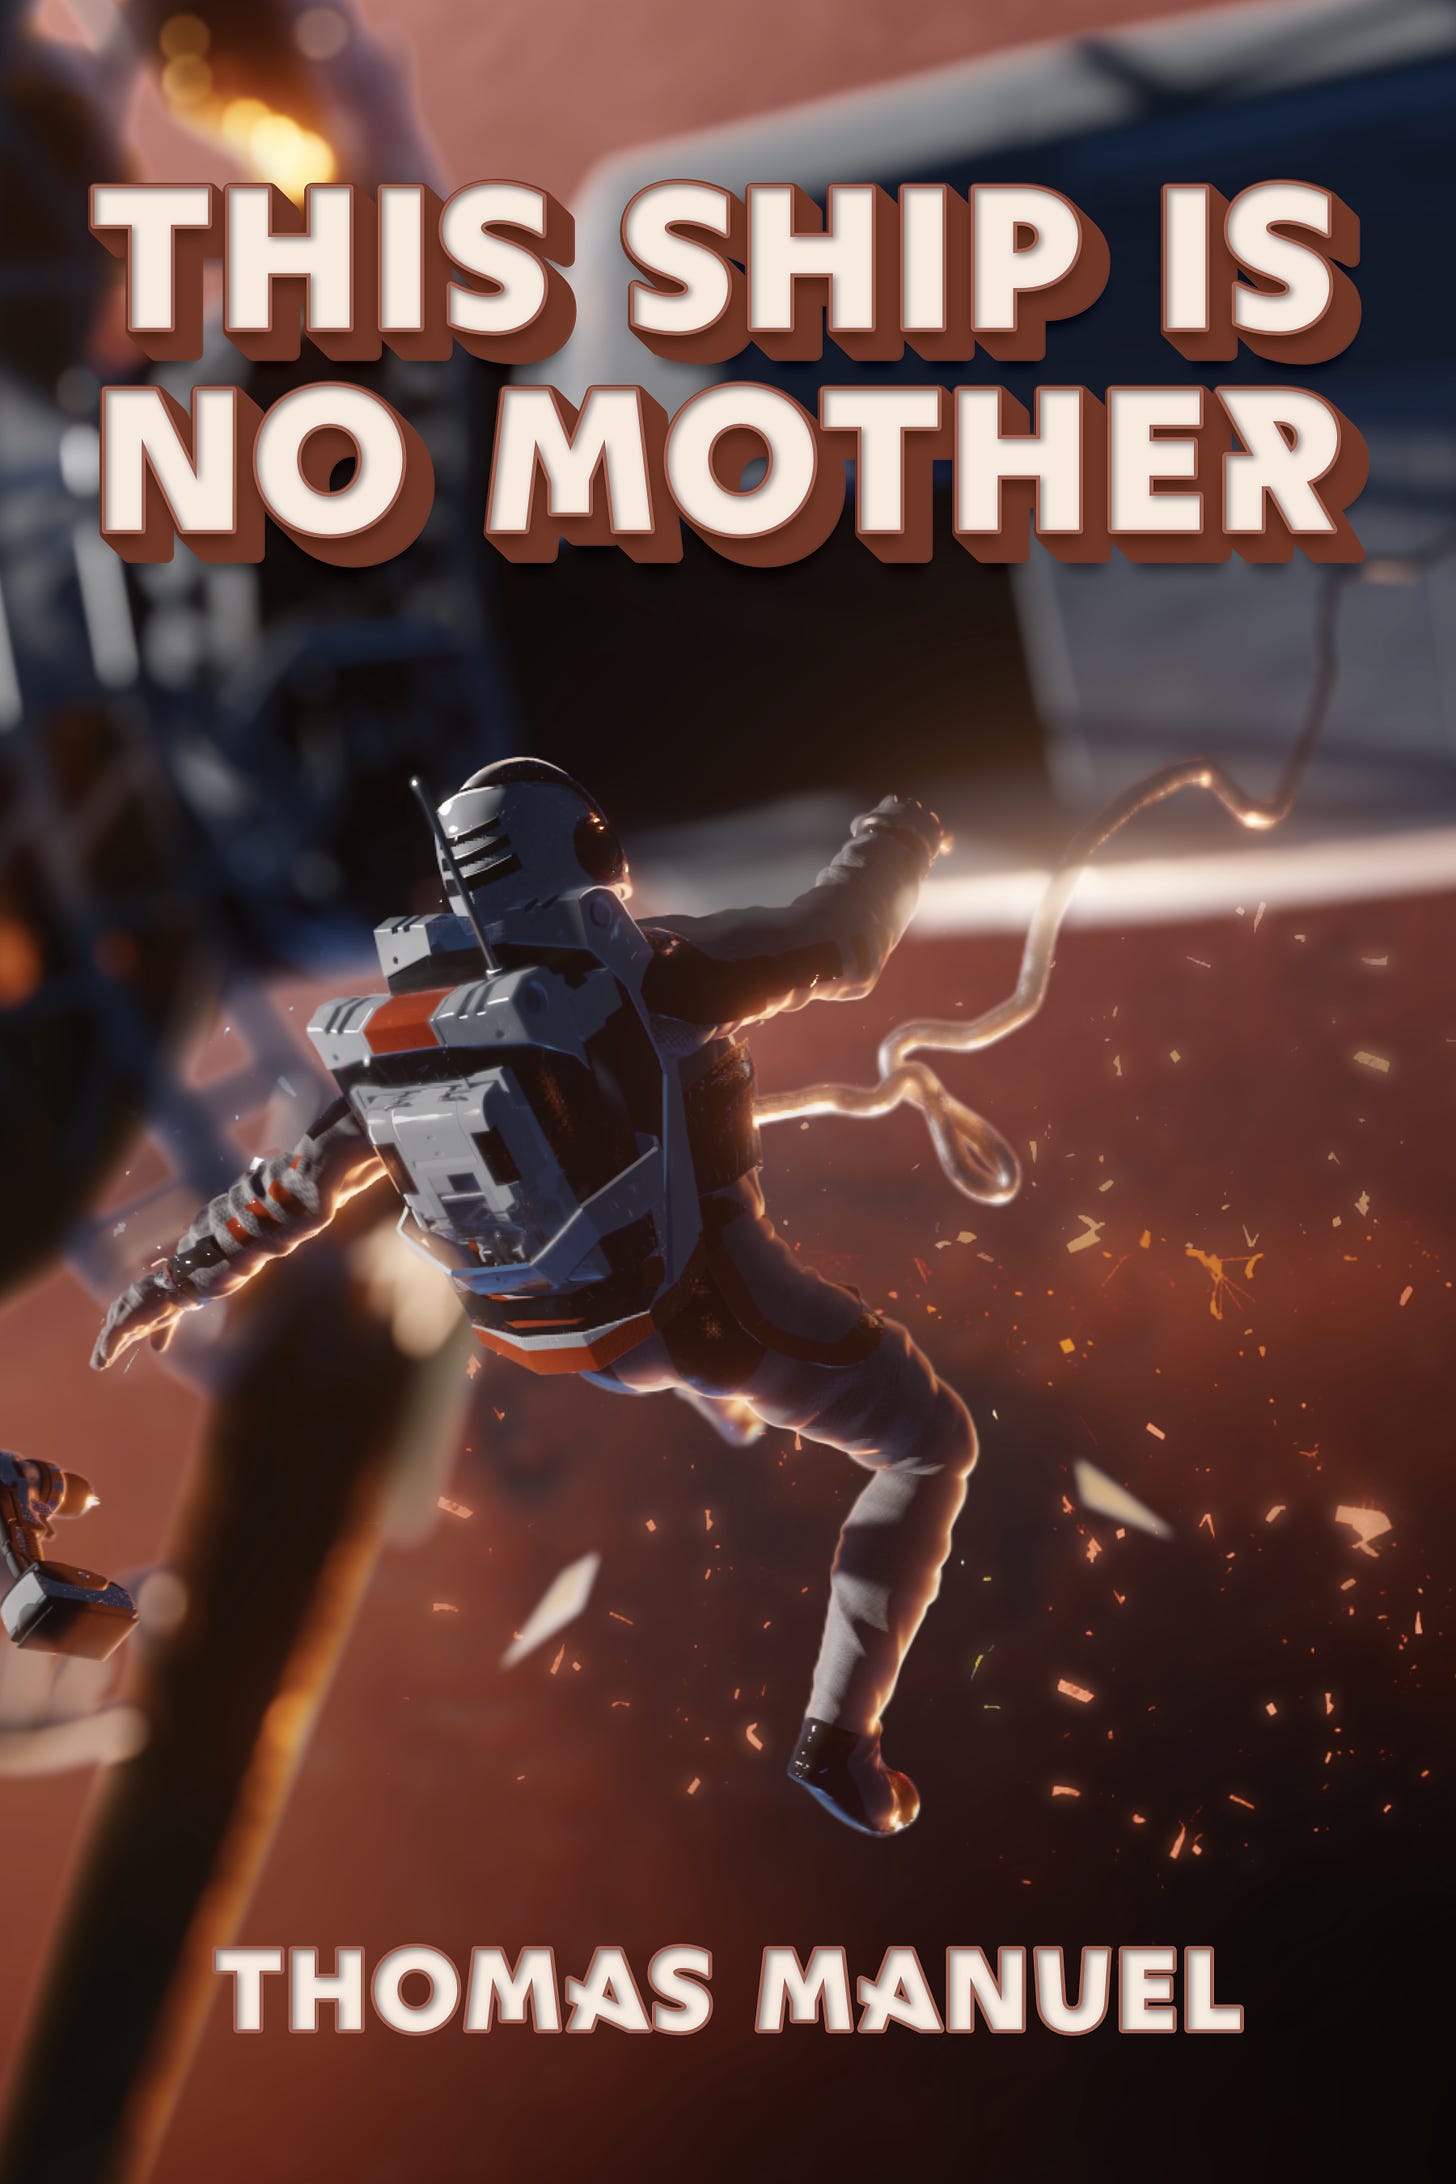 An astronaut violently ejected from a spaceship, a wire like an umbilical cord dangling behind him. The image reads "This Ship Is No Mother".